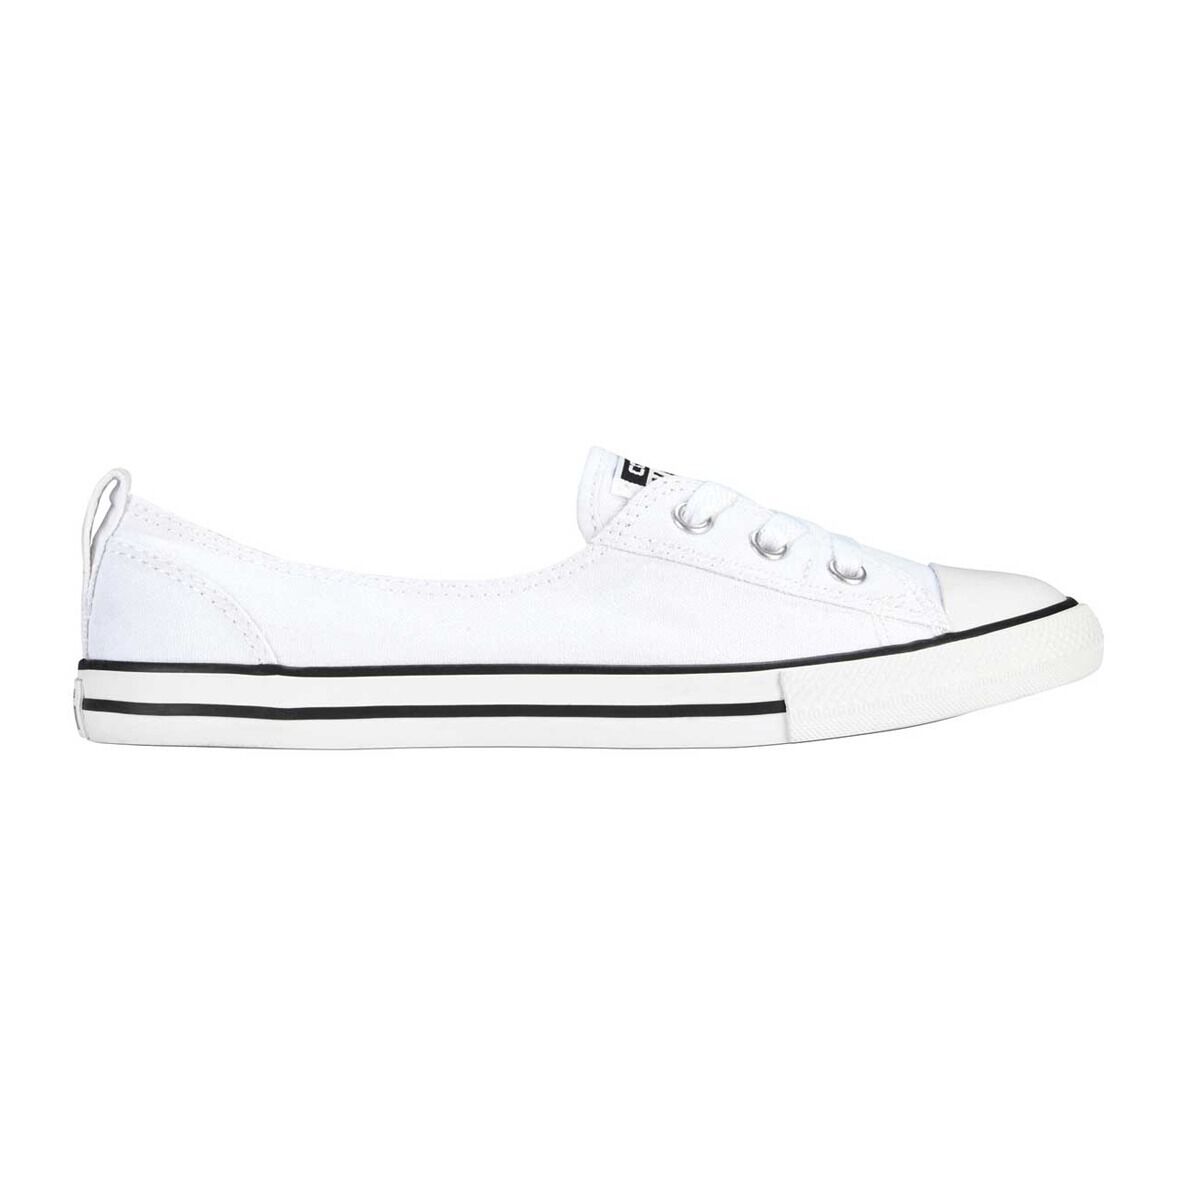 converse chuck taylor all star ballet women's casual shoes